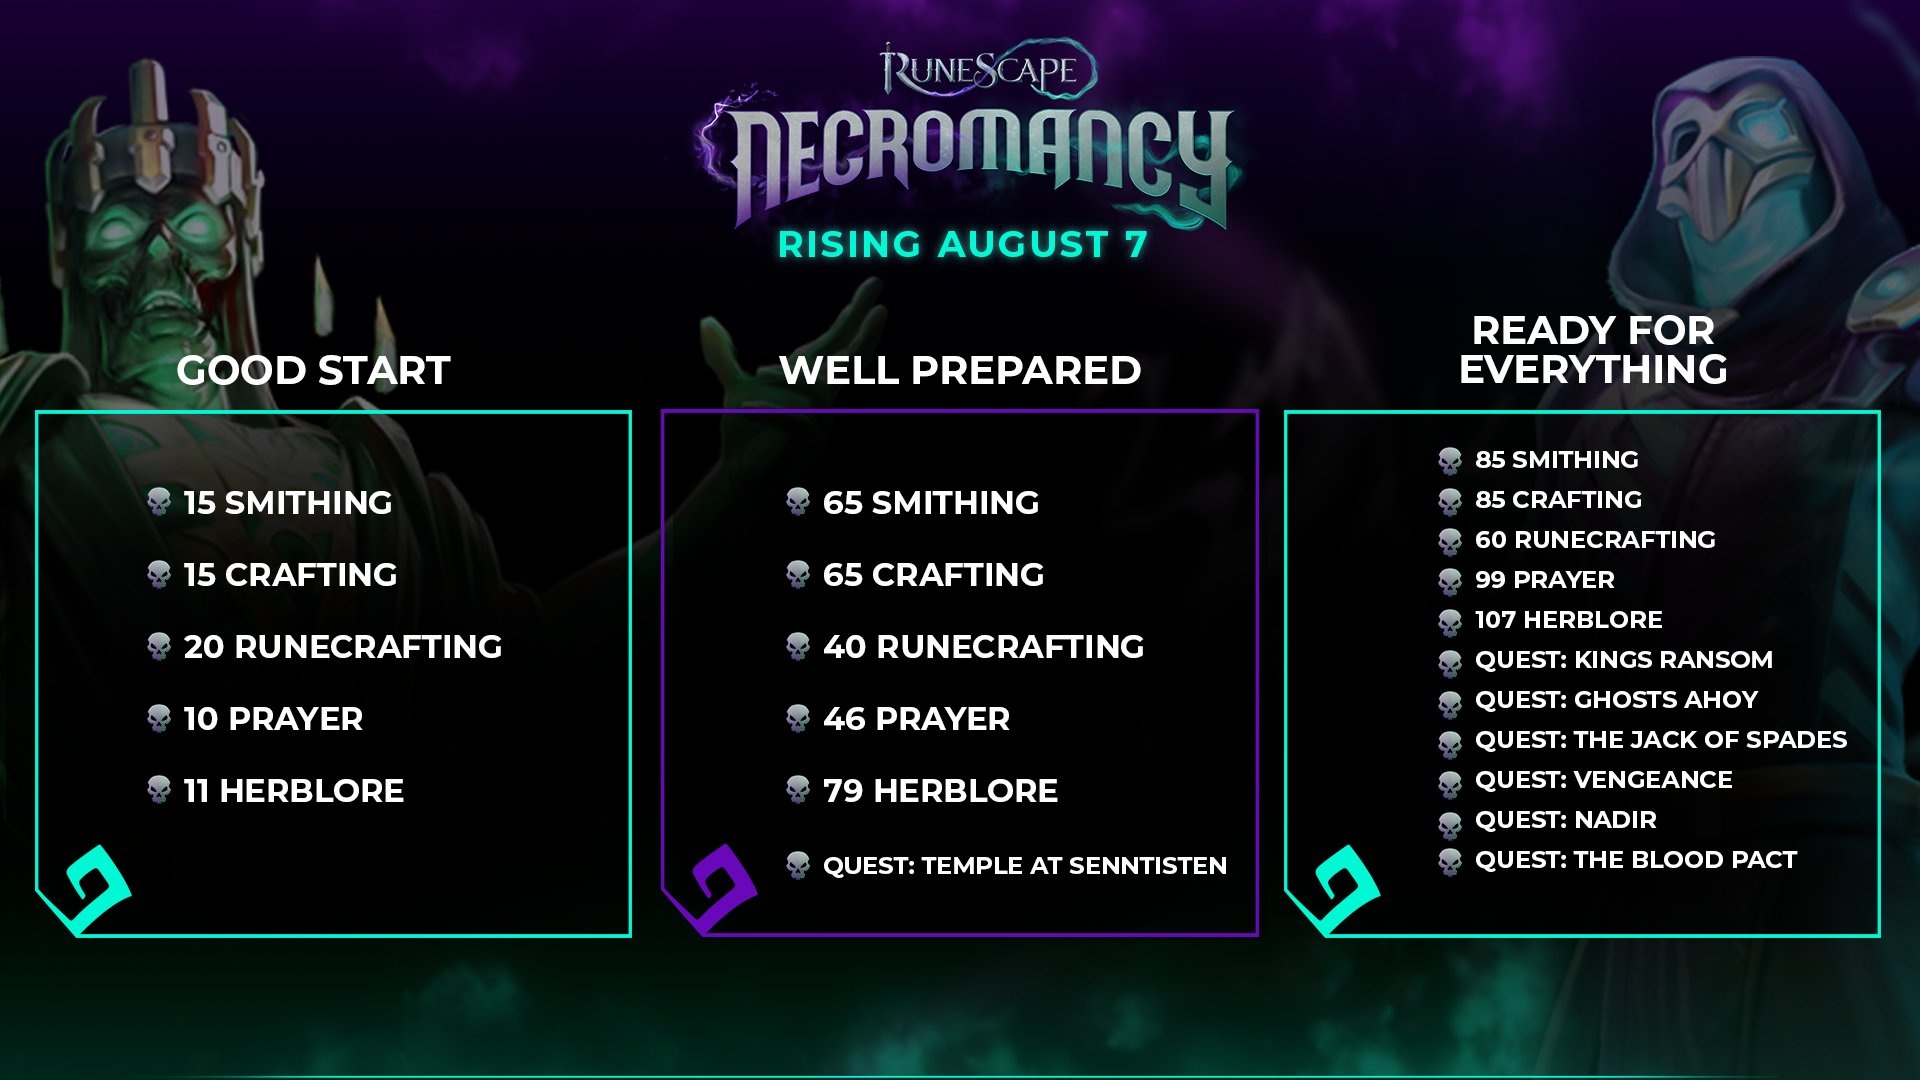 Necromancy Arrives in RuneScape on August 7th